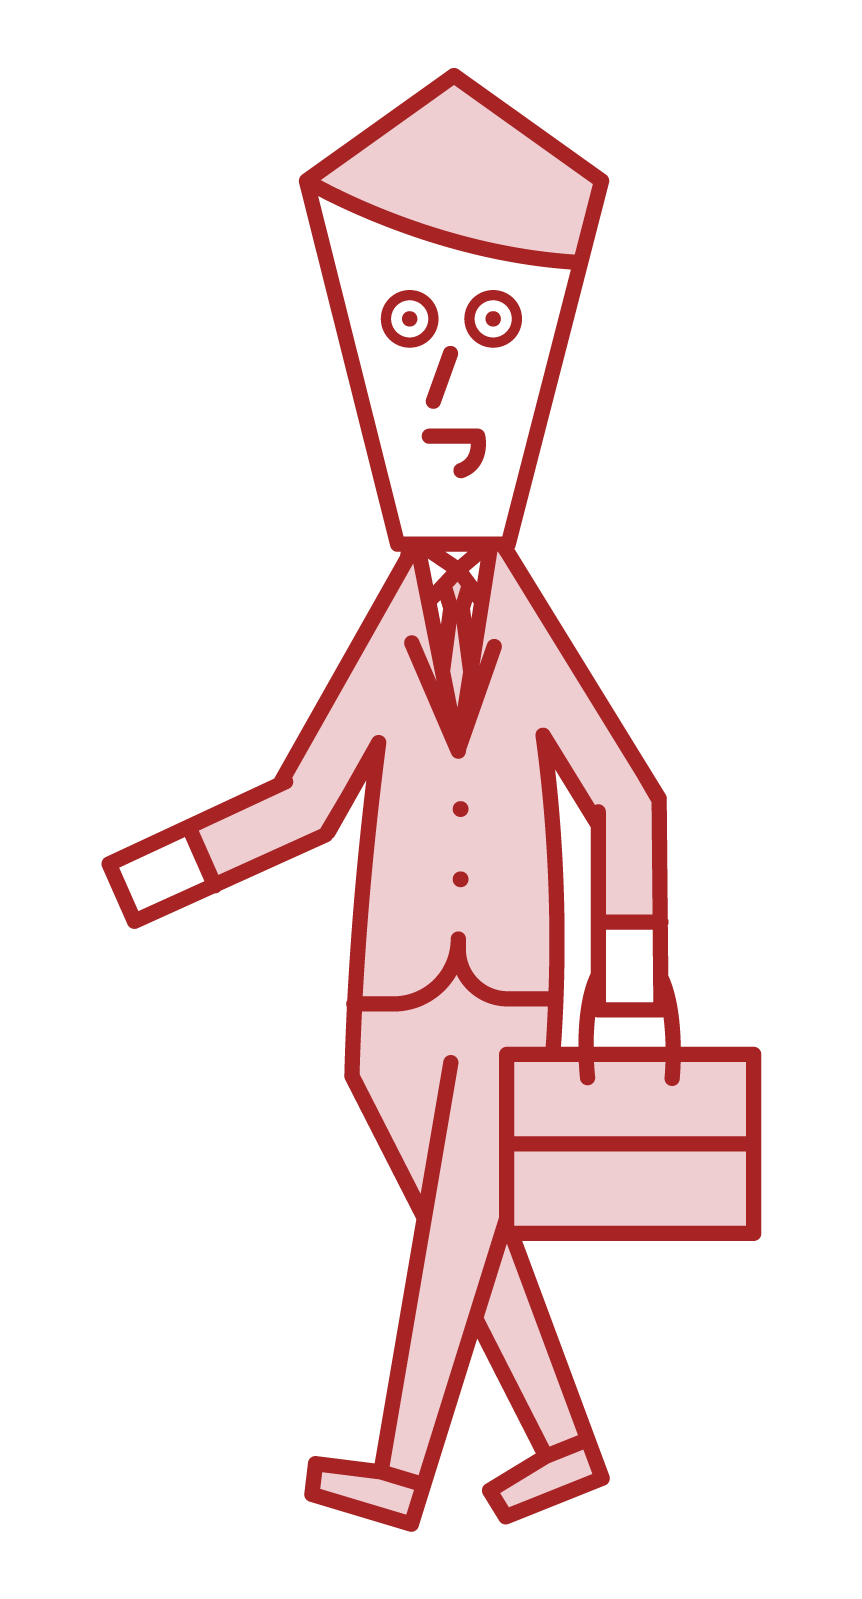 Illustration of a walking person (male)